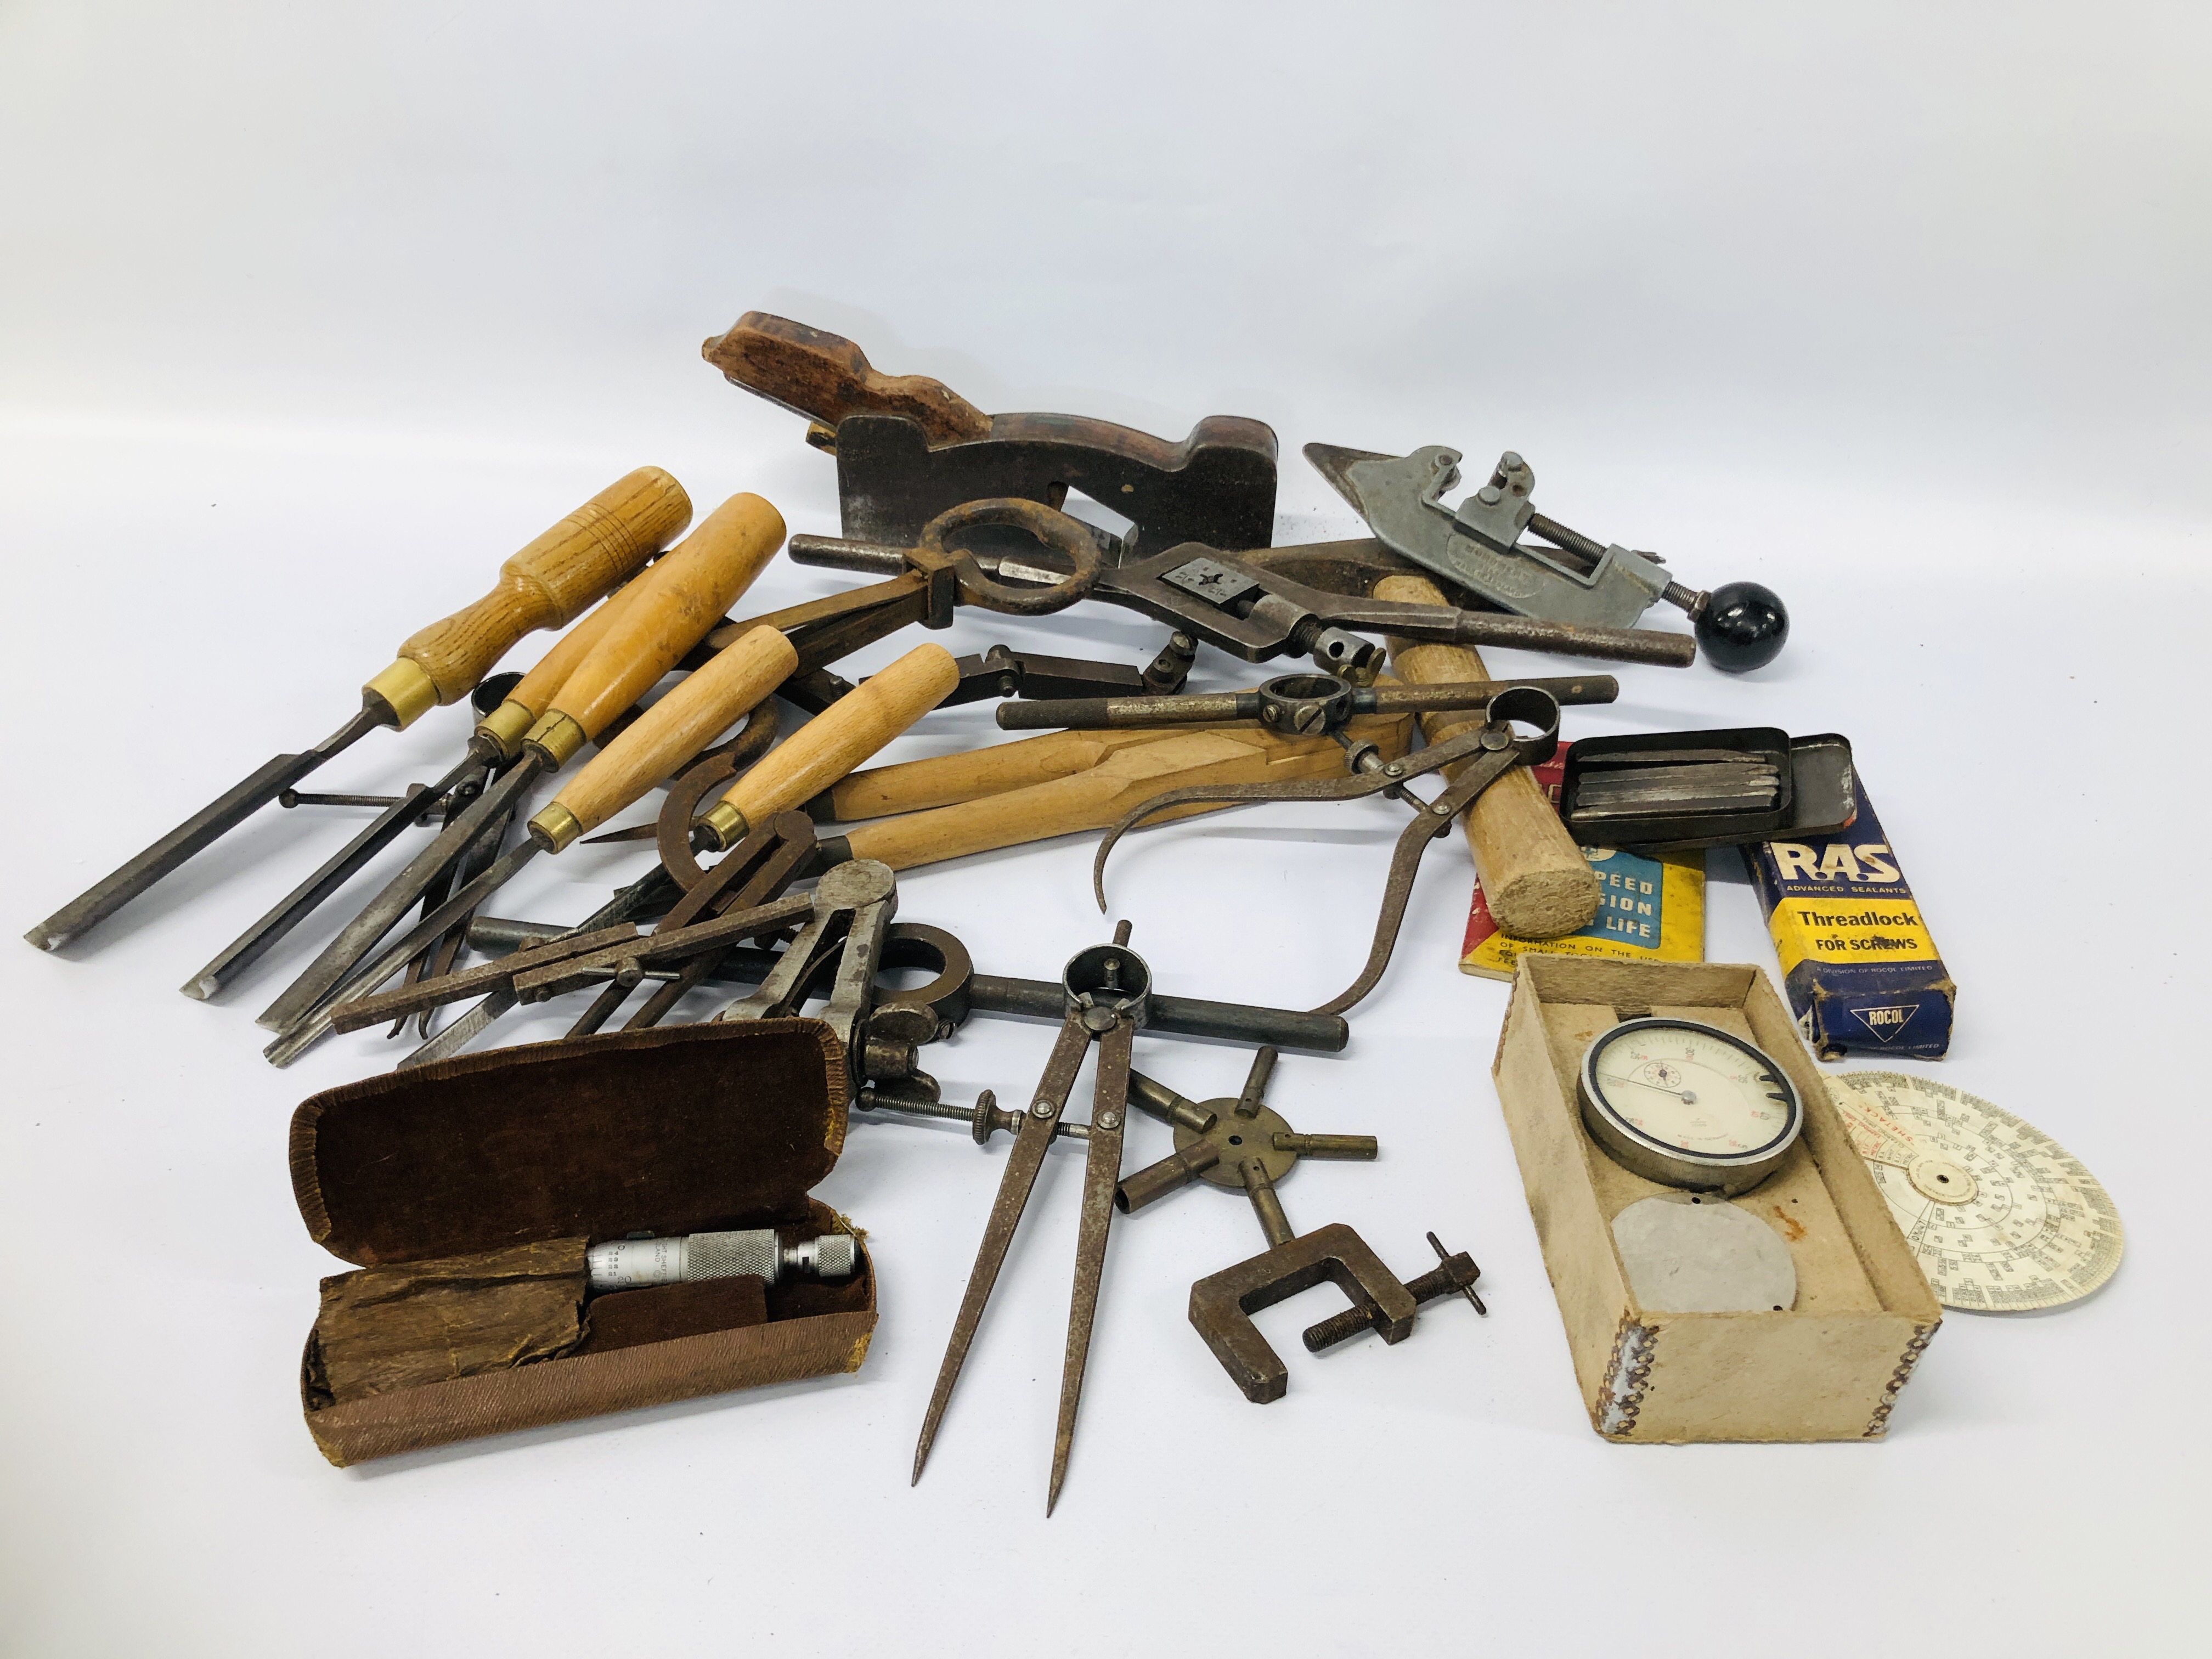 BOX OF ASSORTED VINTAGE TOOLS TO INCLUDE VARIOUS PRECISION MEASURING INSTRUMENTS, ETC.